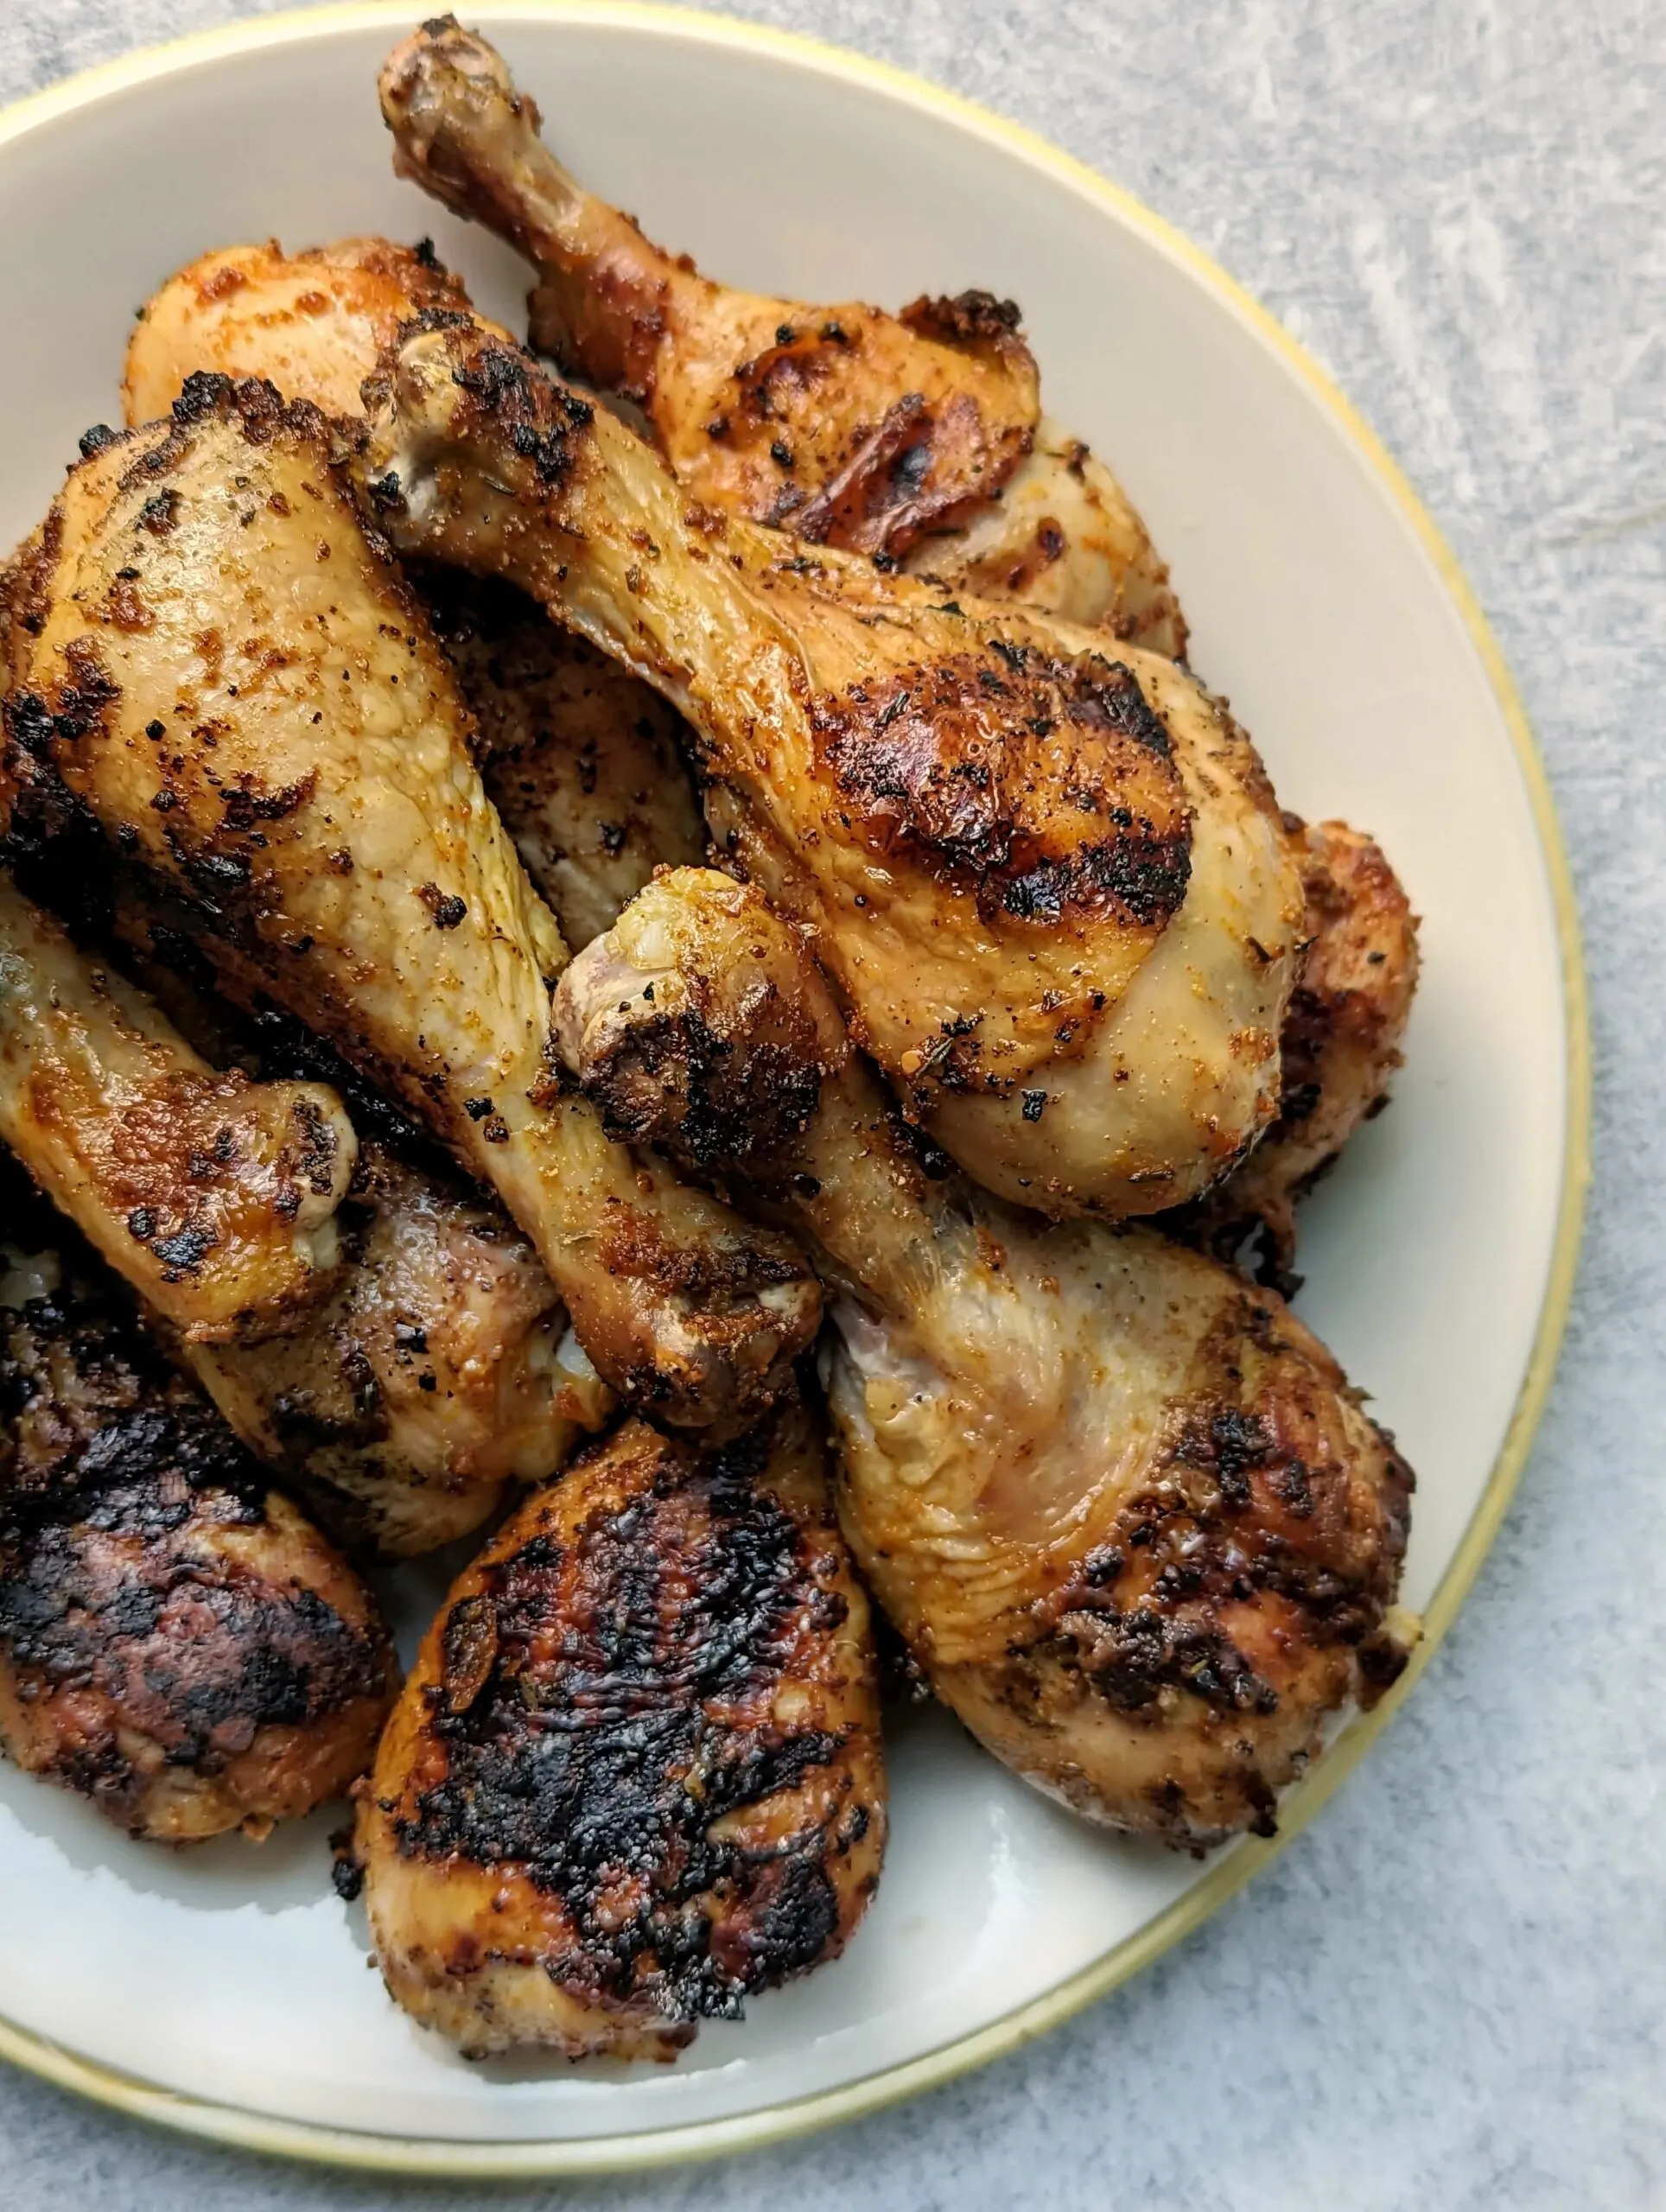 A plate full of grilled chicken drumsticks each with a perfect char.